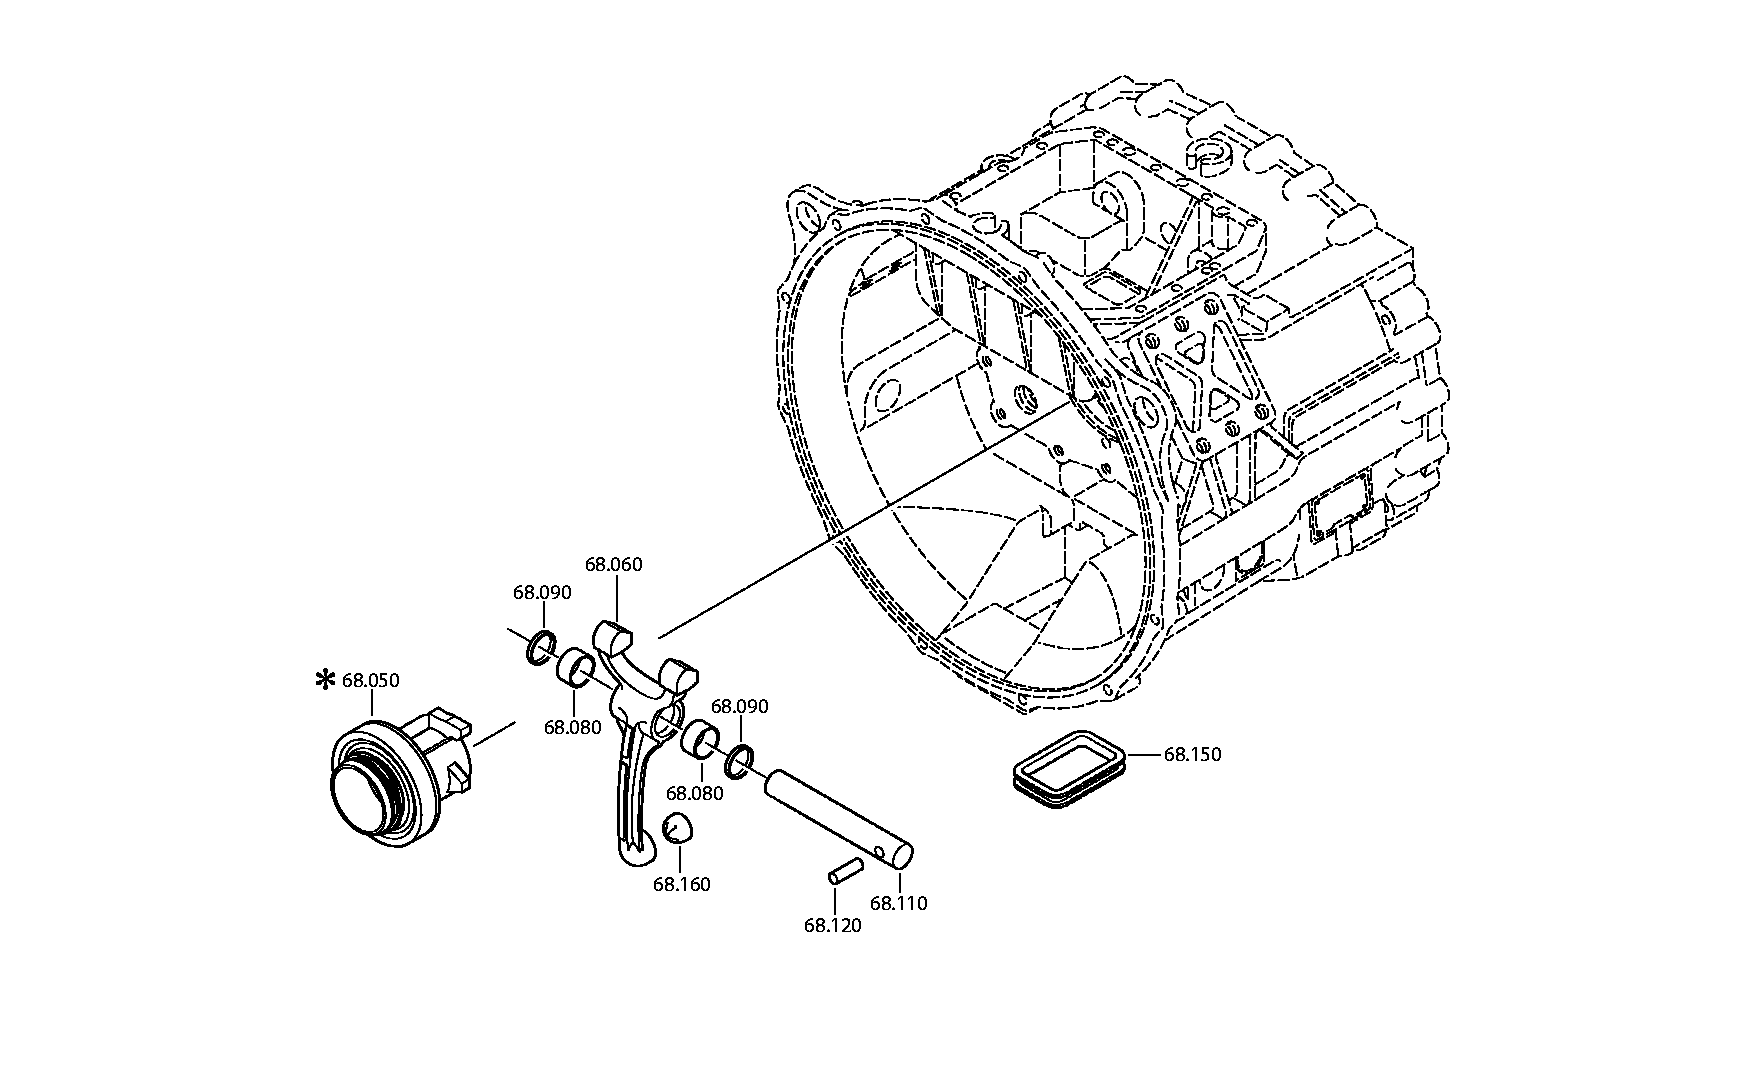 drawing for Manitowoc Crane Group Germany 03324716 - RELEASE DEVICE (figure 1)